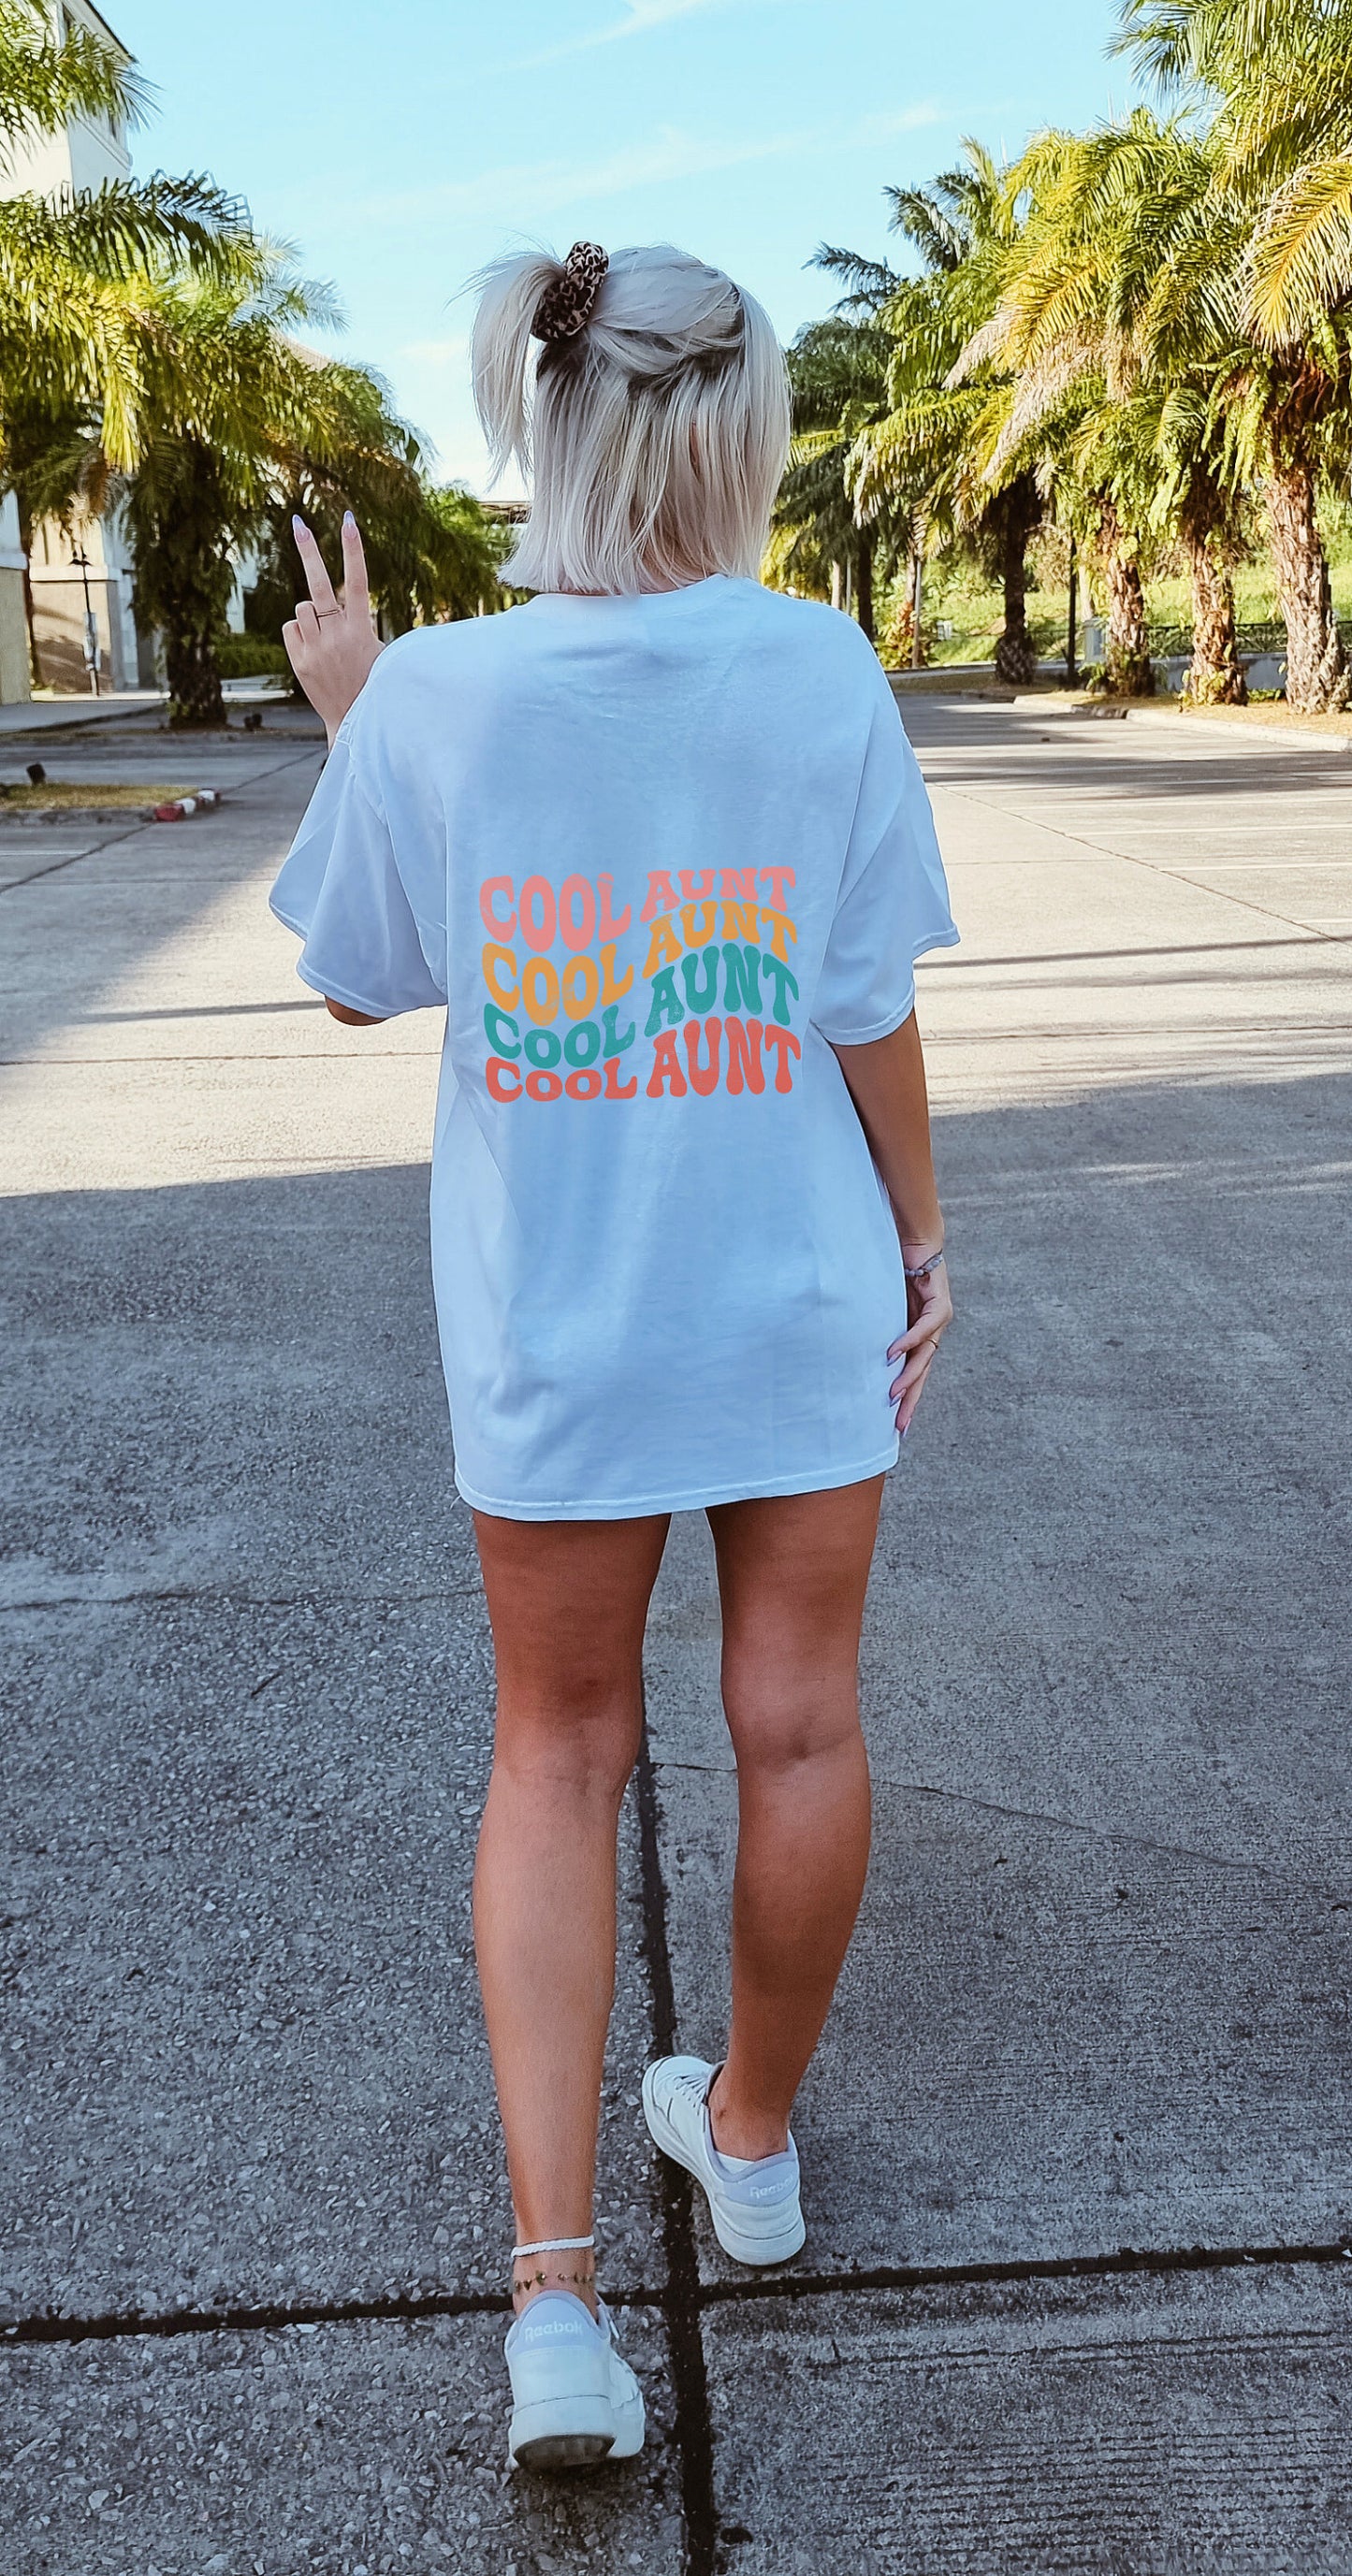 Cool Aunt Shirt, New Aunt Shirt, Wavy Retro Shirt, Oversized Comfy Tee, Gift for Aunt, Disco Ball Shirt